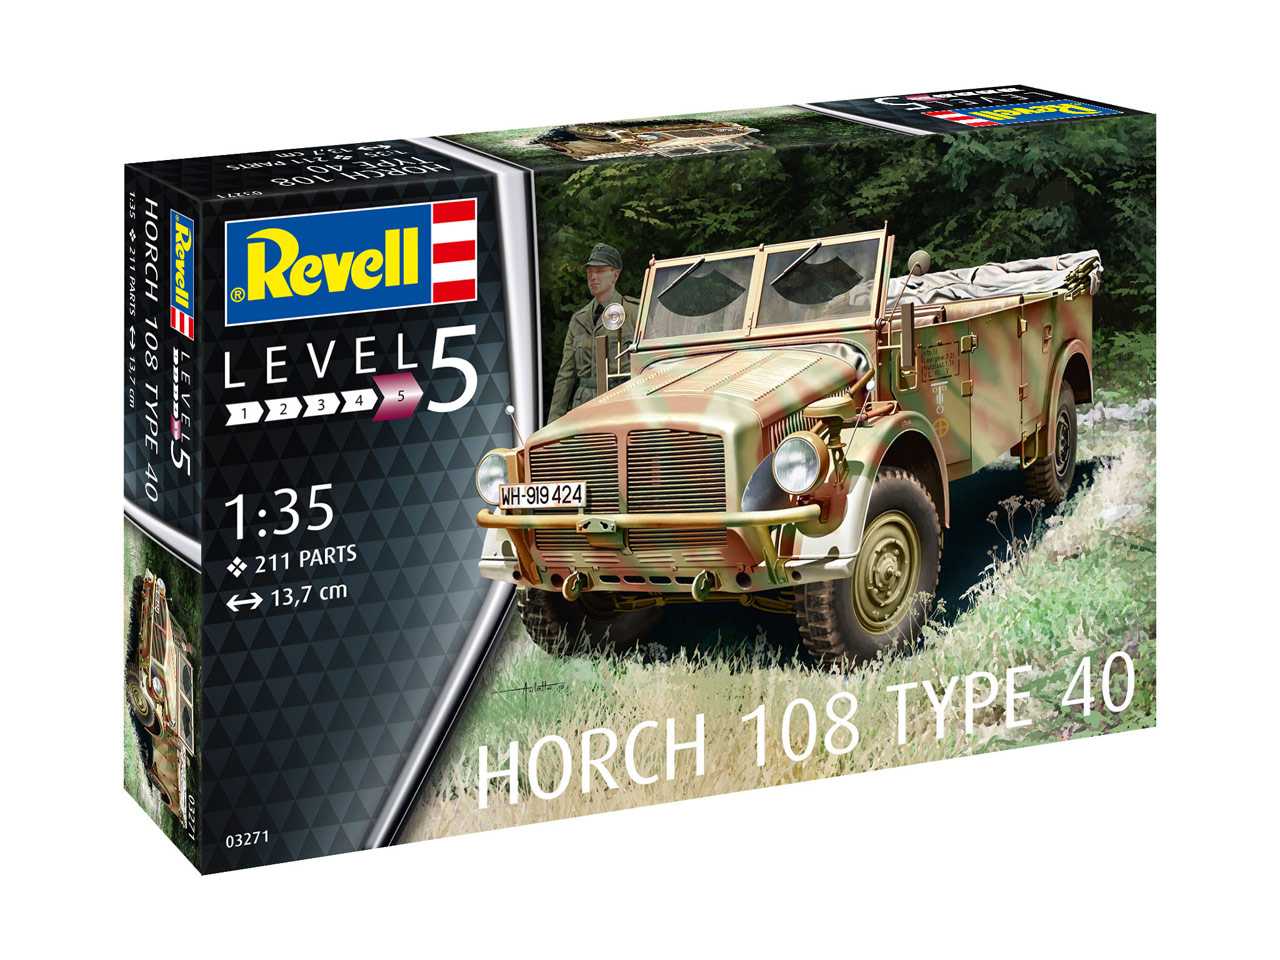 Plastic ModelKit military 03271 - Horch 108 Type 40 (1:35)